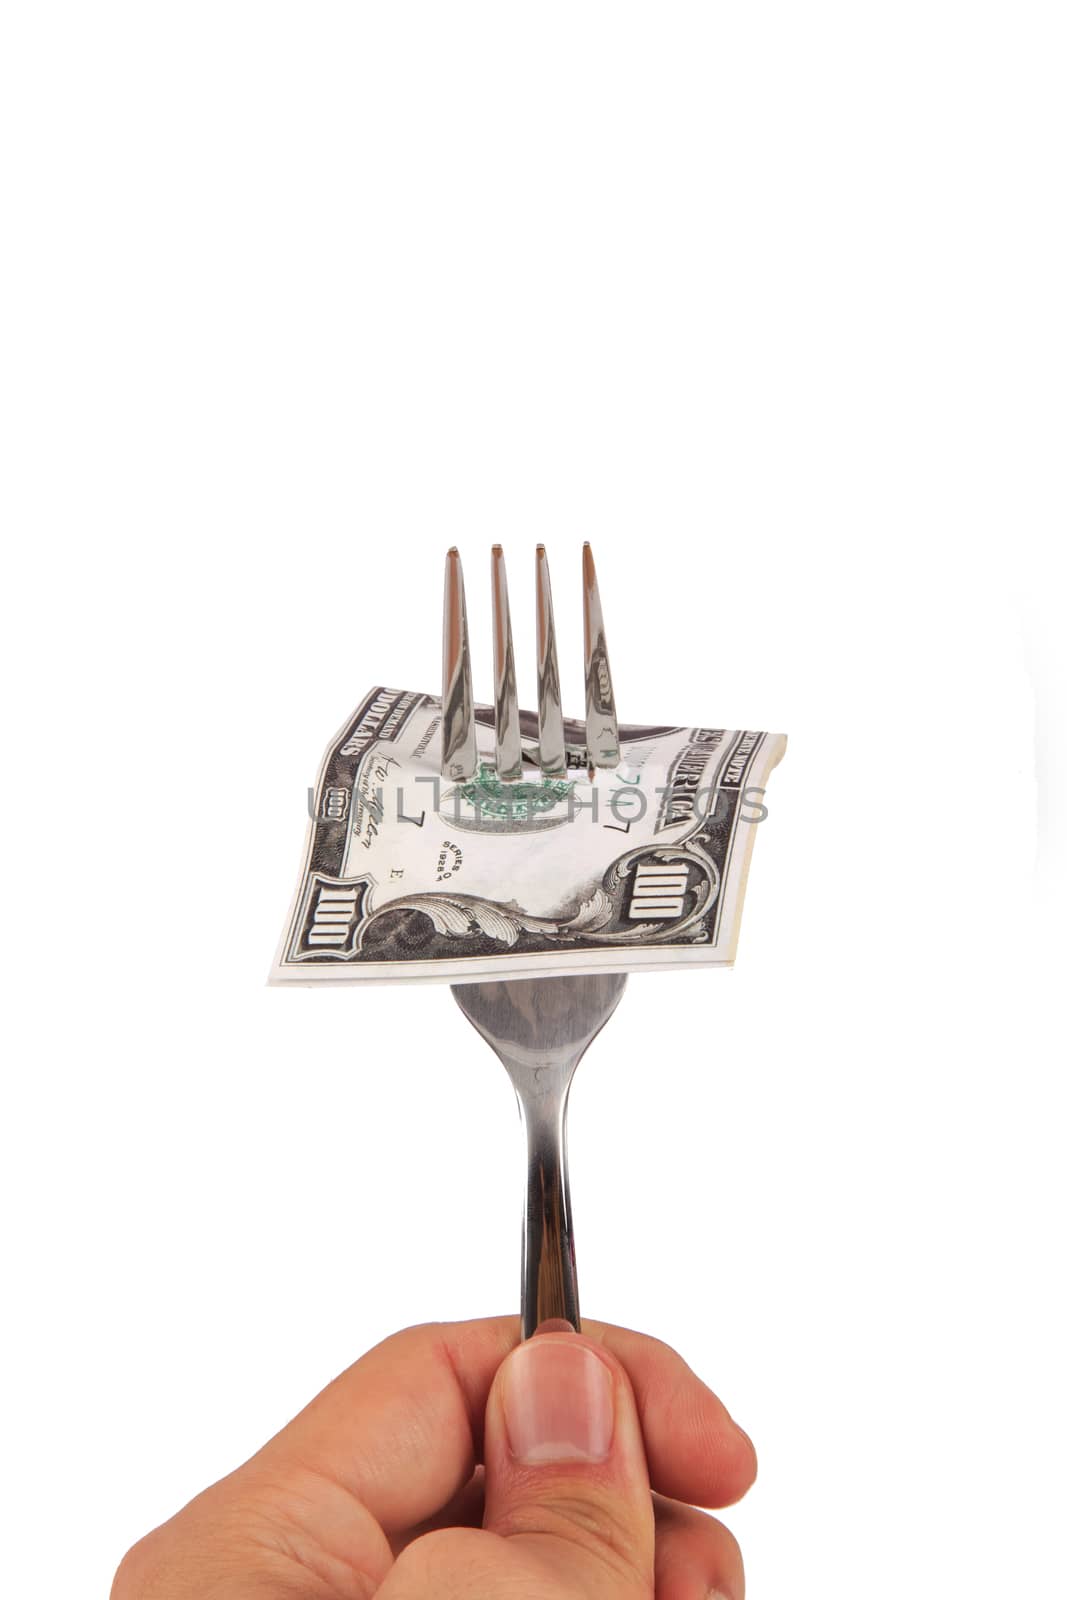 View of one hundred dollar banknotes on a fork, isolated on white background.